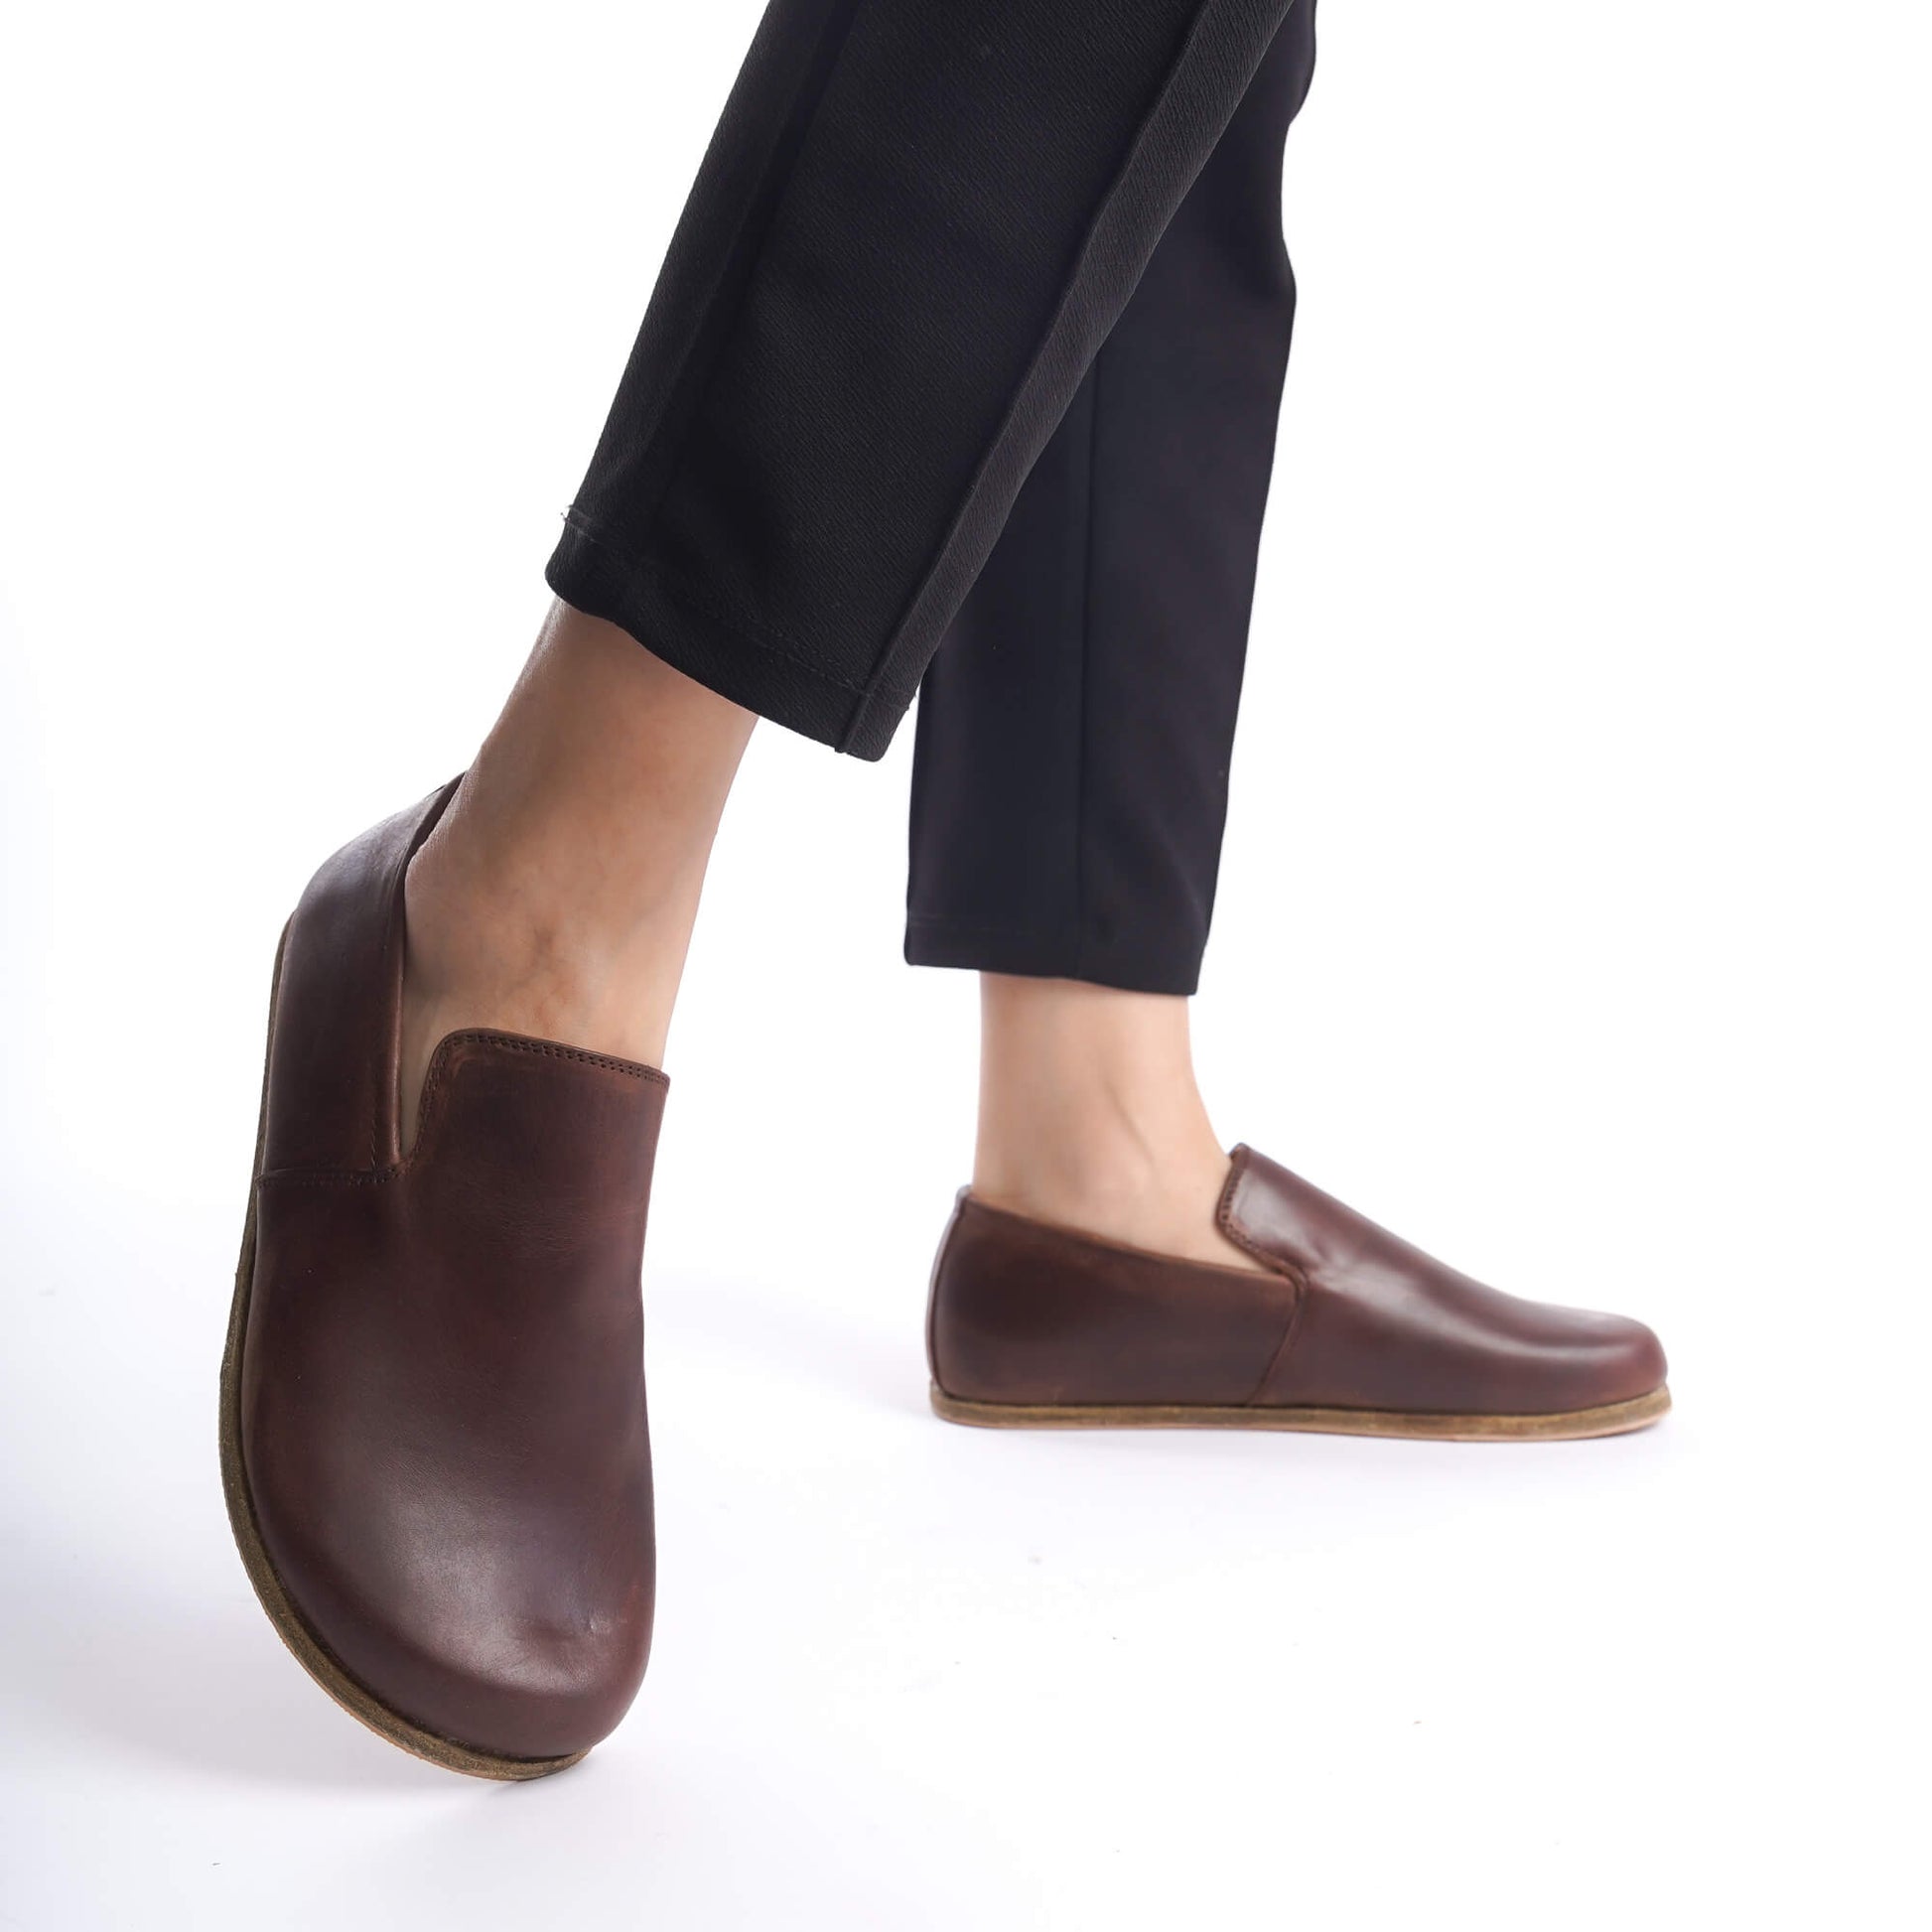 Model wearing black pants and Aeolia Brown Women Loafers, showcasing the shoe's elegant design and comfortable fit in motion.